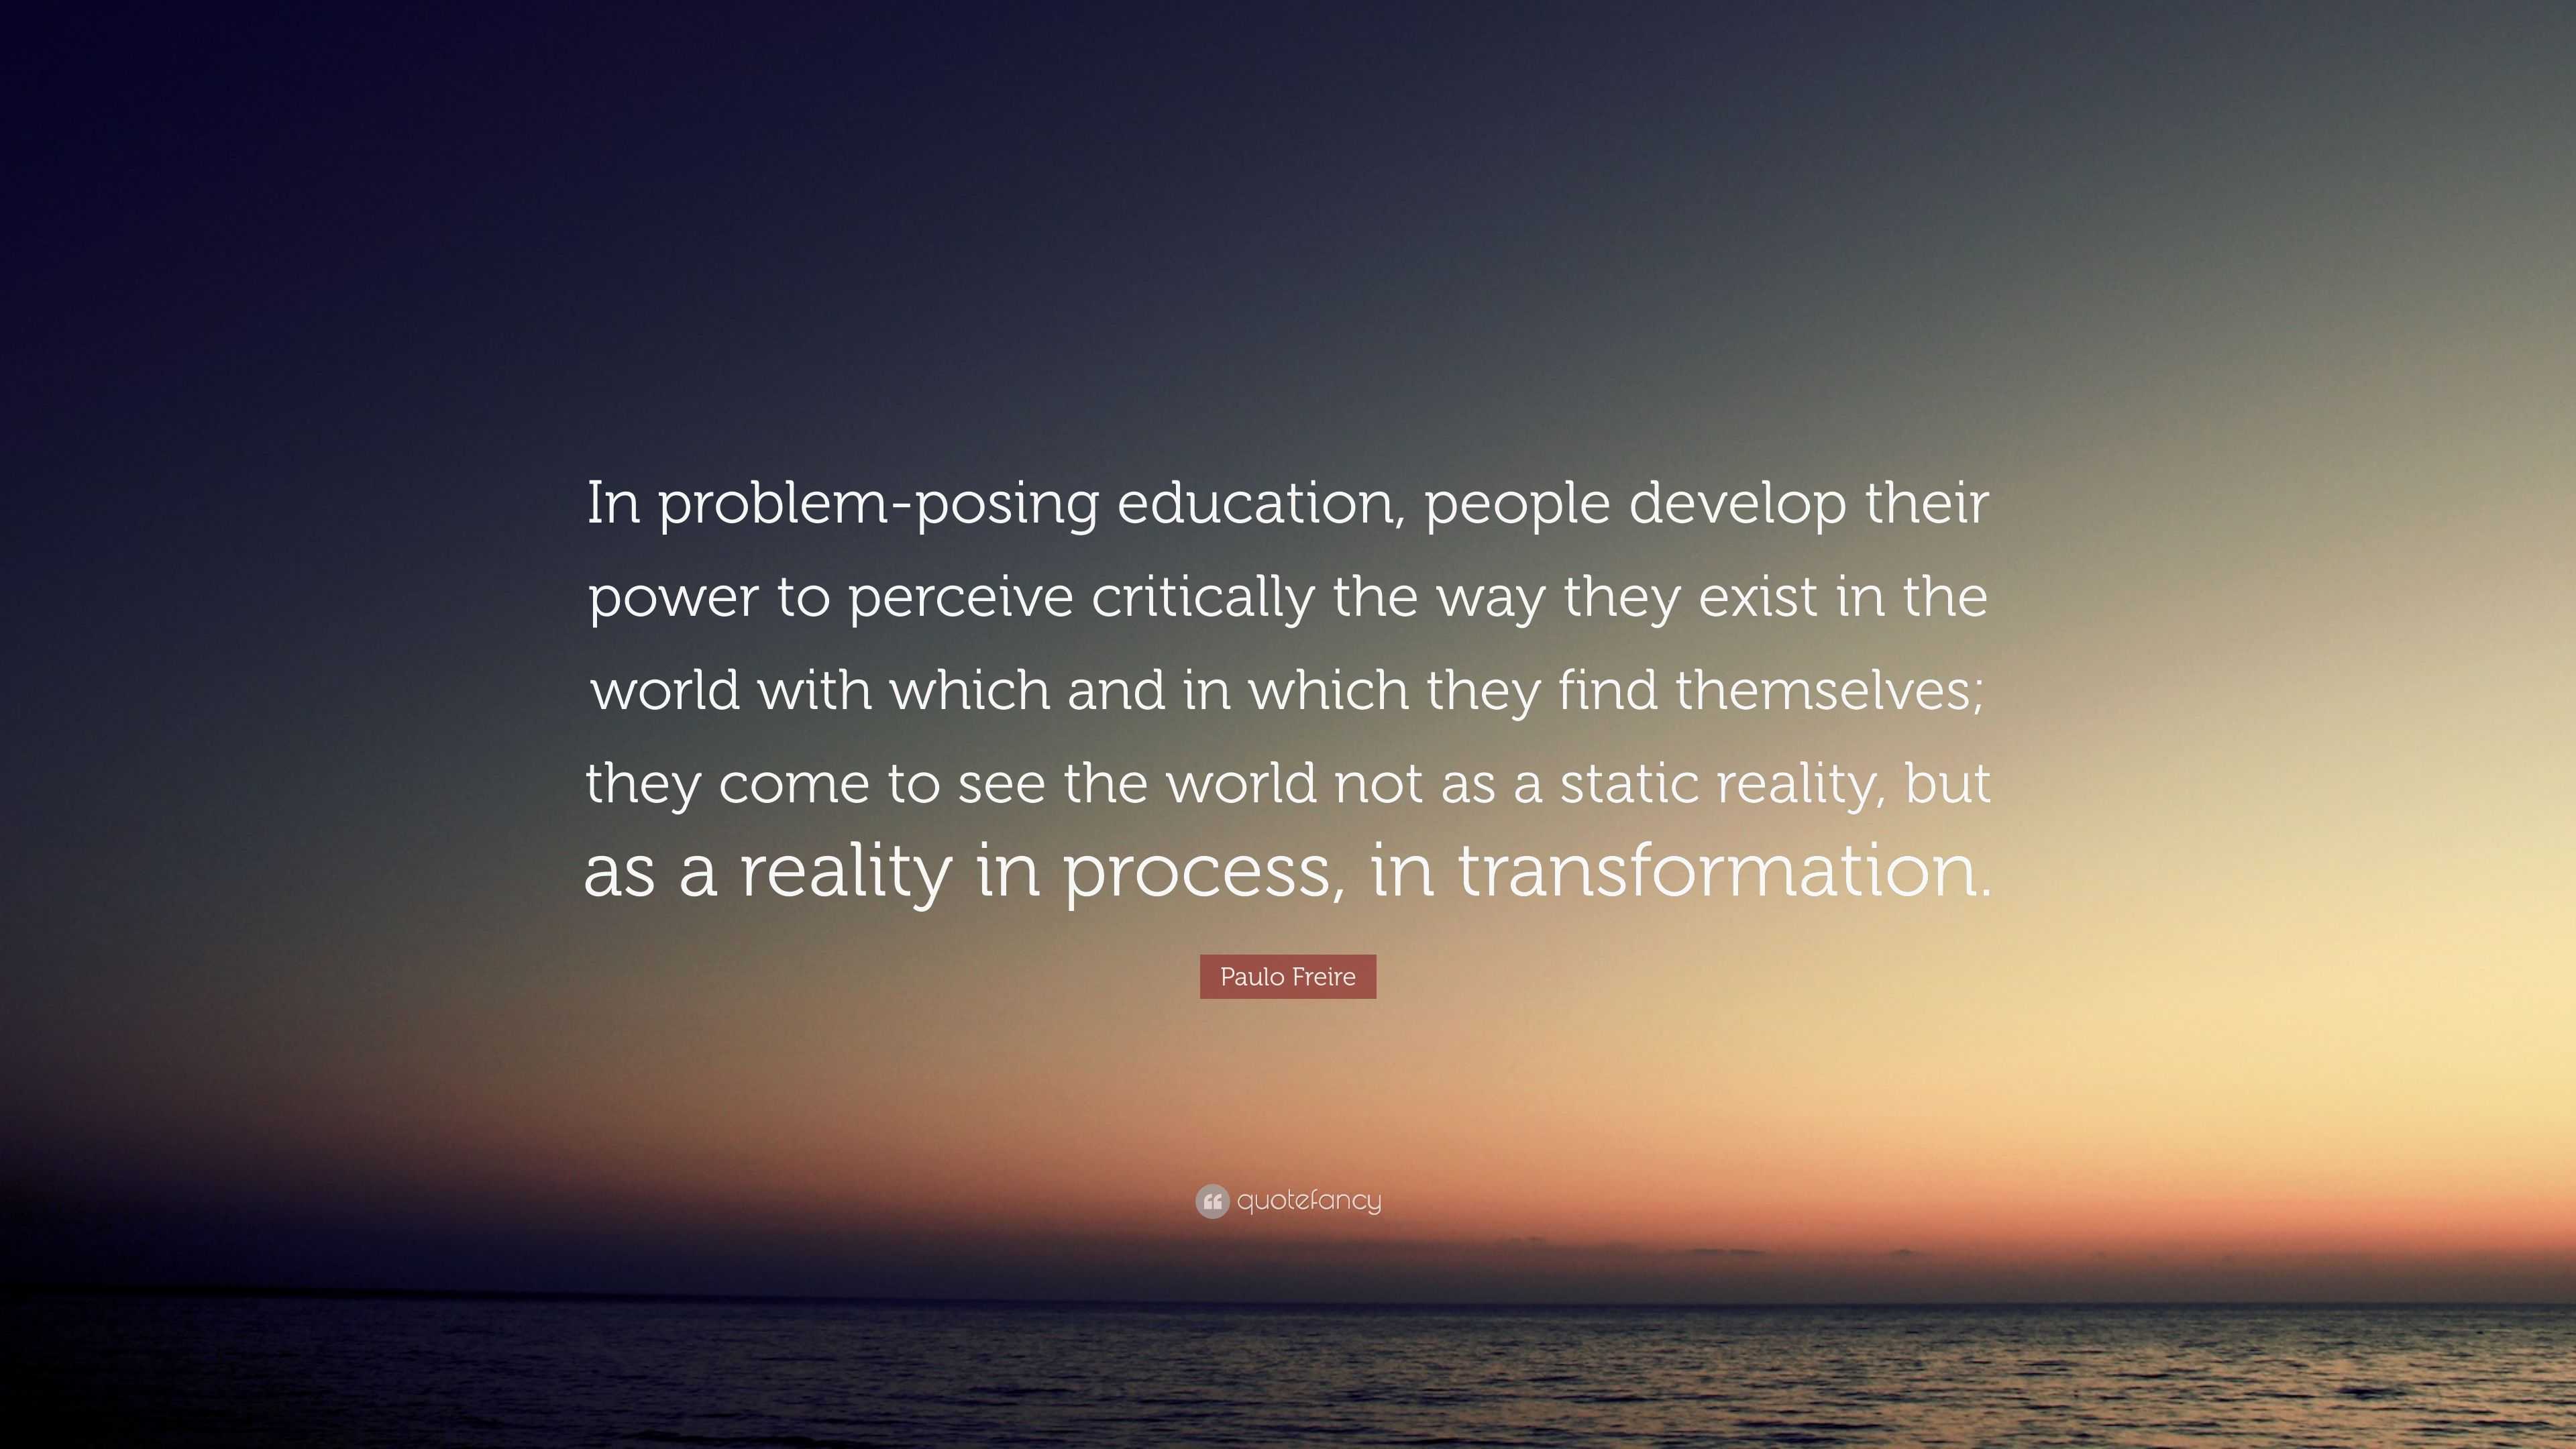 Paulo Freire Quote: “In problem-posing education, people develop their